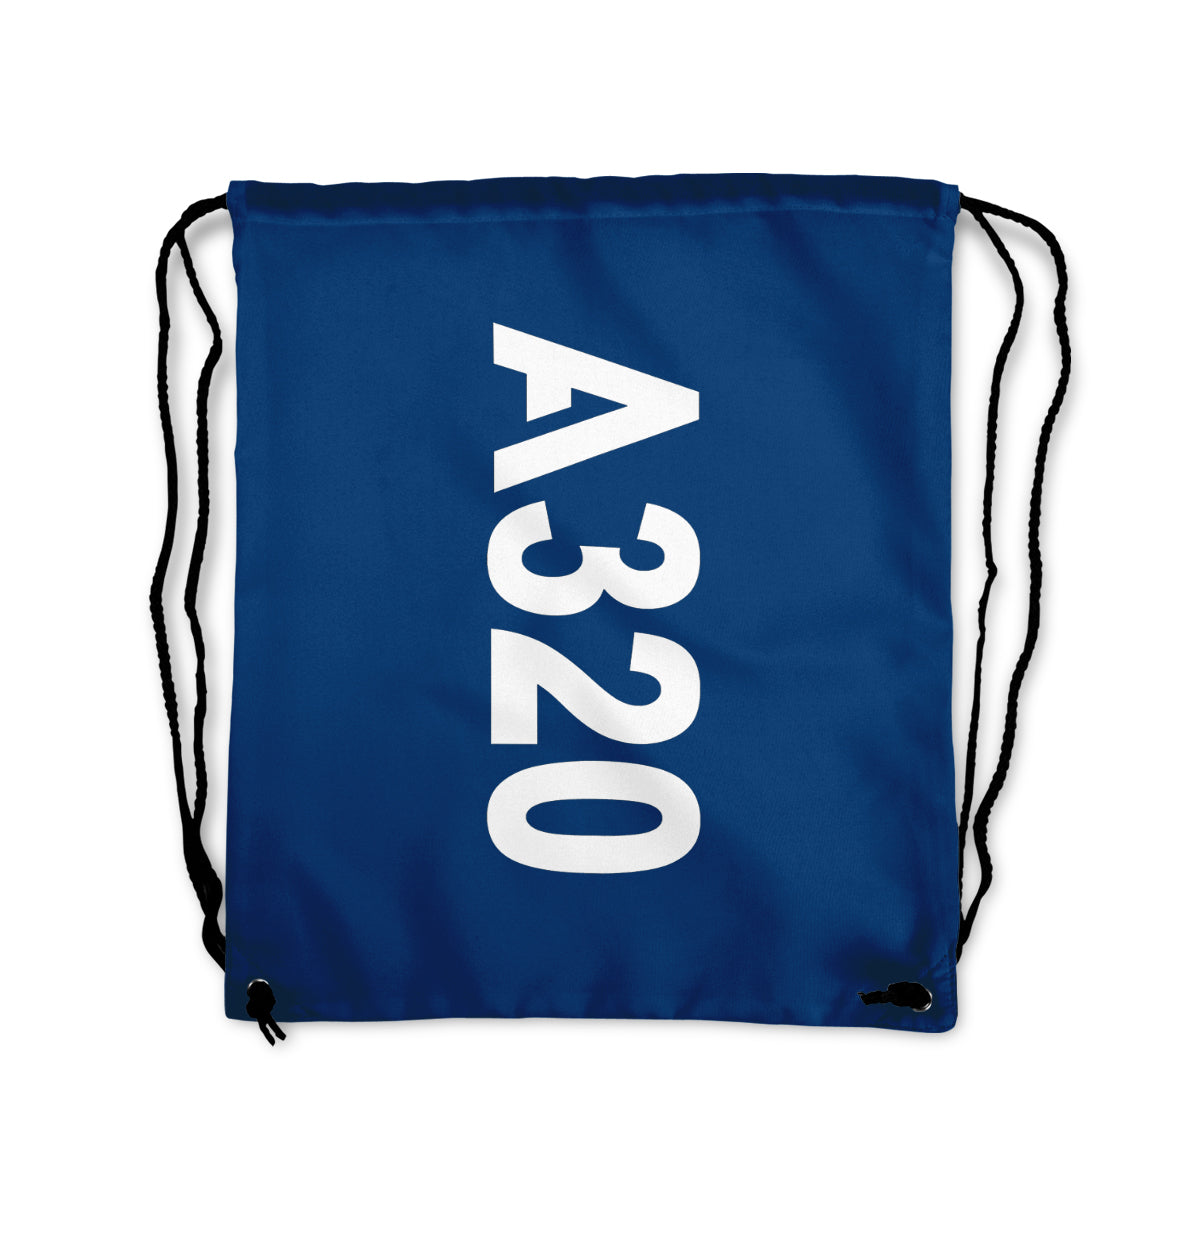 A320 Text Designed Drawstring Bags